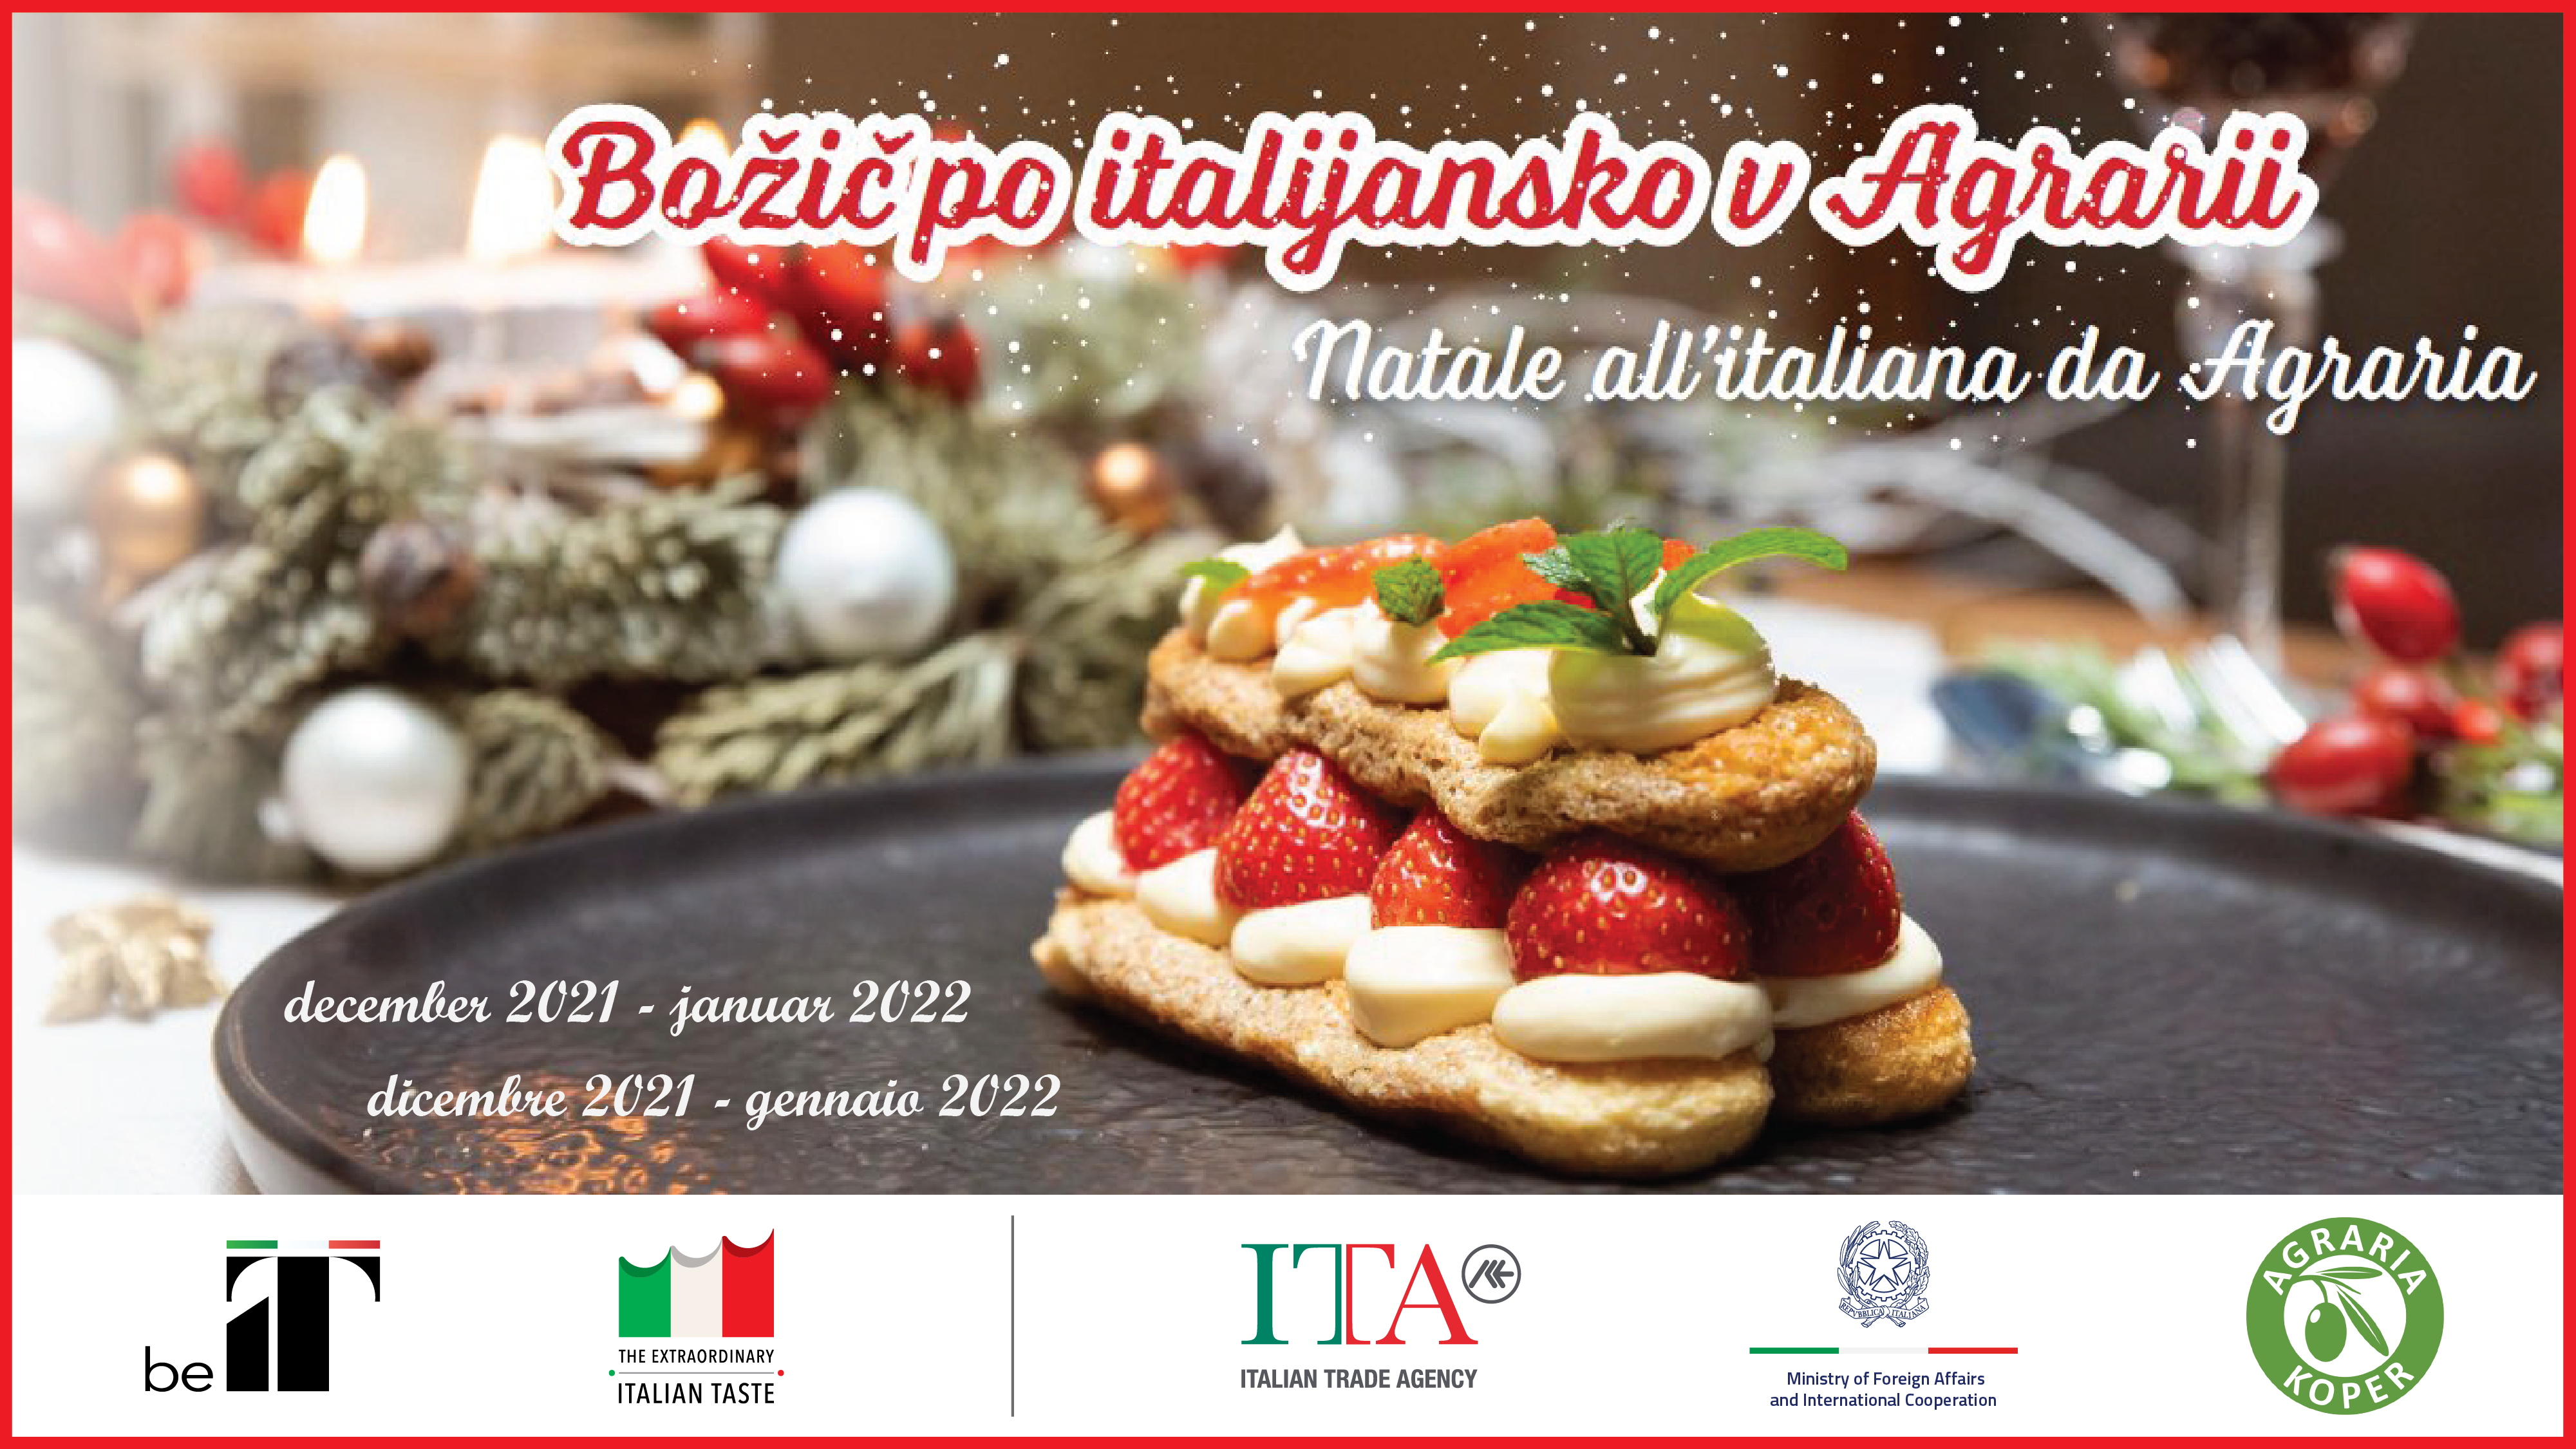 Italian Christmas Promotion in Agraria